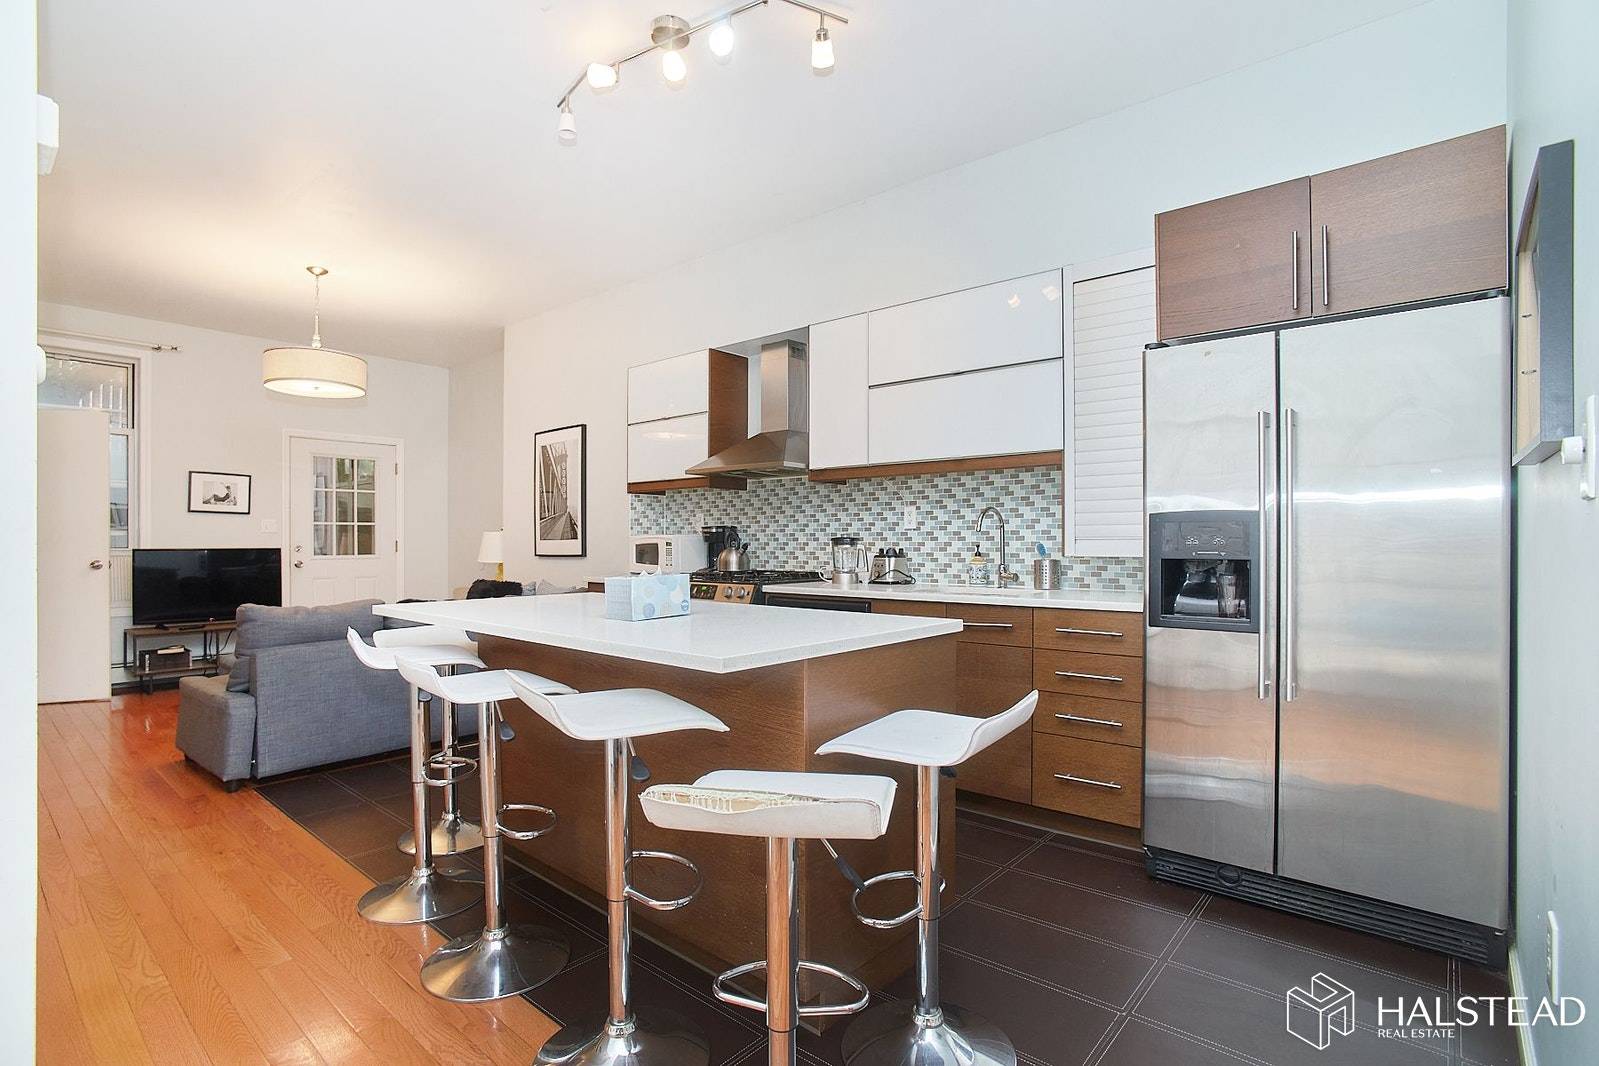 Situated on the first floor of a beautiful Brownstone building, this elegant, fully renovated 3 bed 2 bath apartment boasts high end modern finishes and includes a peaceful, serene outdoor ...